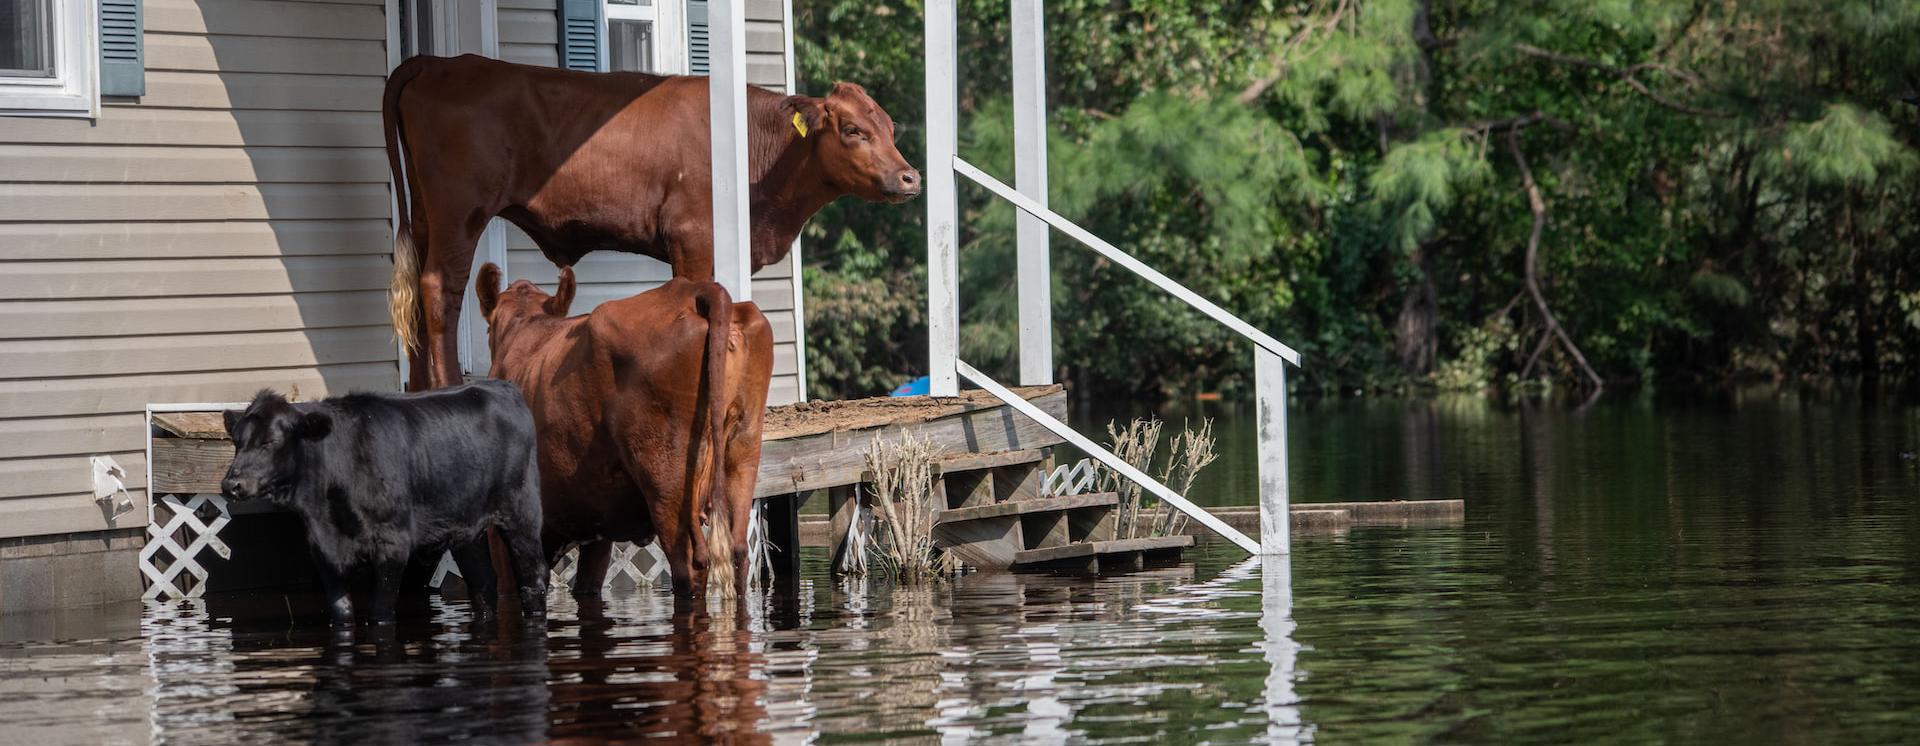 Flooded house with cows on the porch